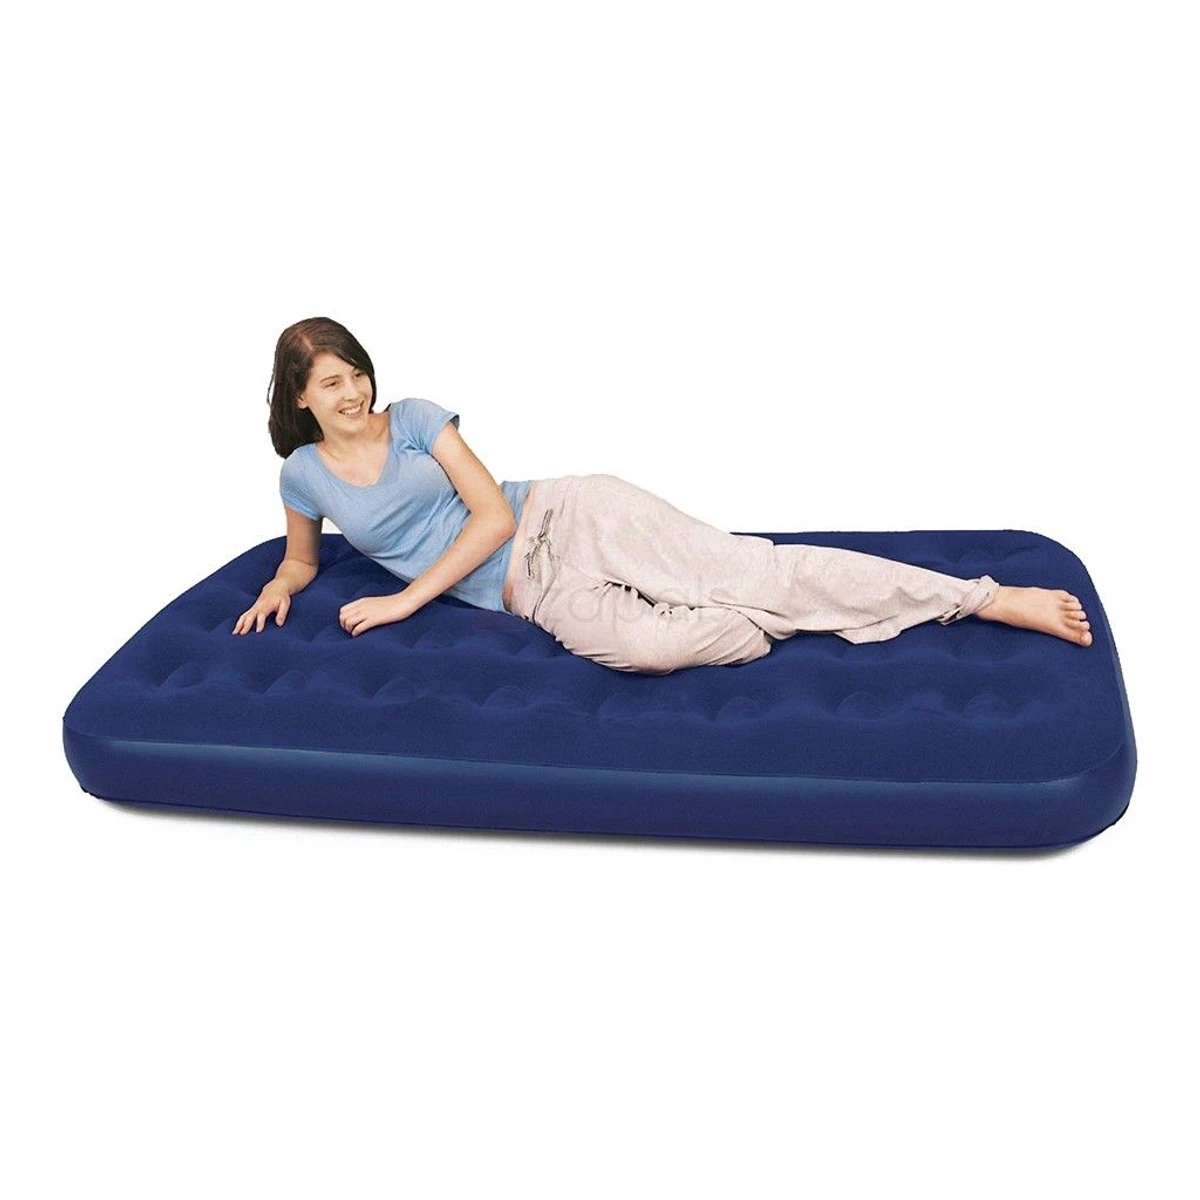 Bestway Inflatable Single Air Bed With Electric pumper